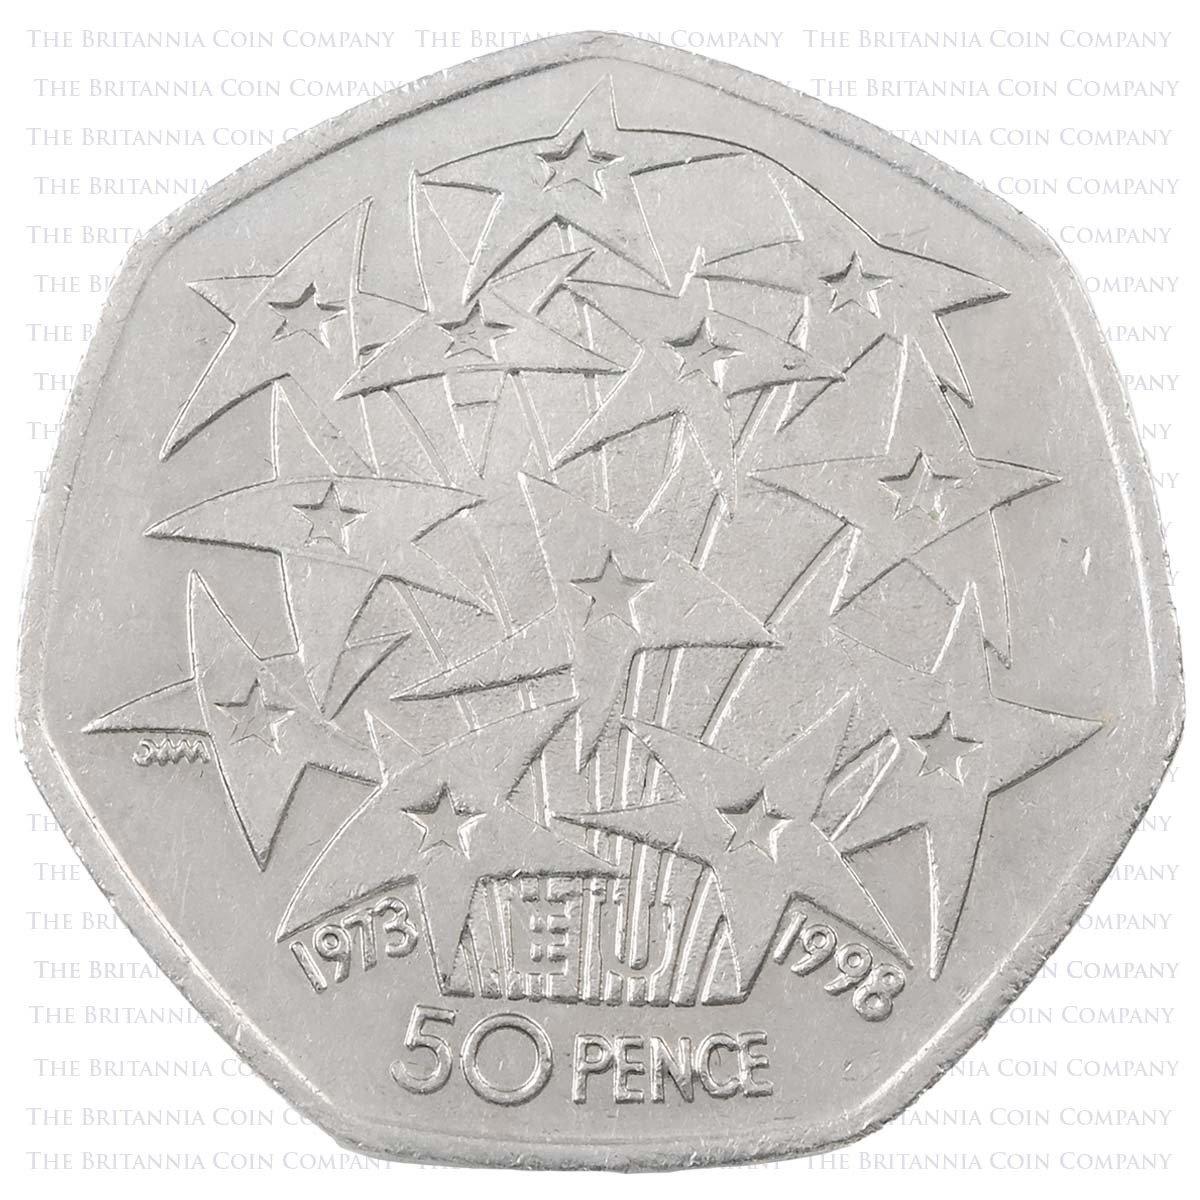 1998 European Union Economic Community Stars Circulated Fifty Pence Coin Reverse